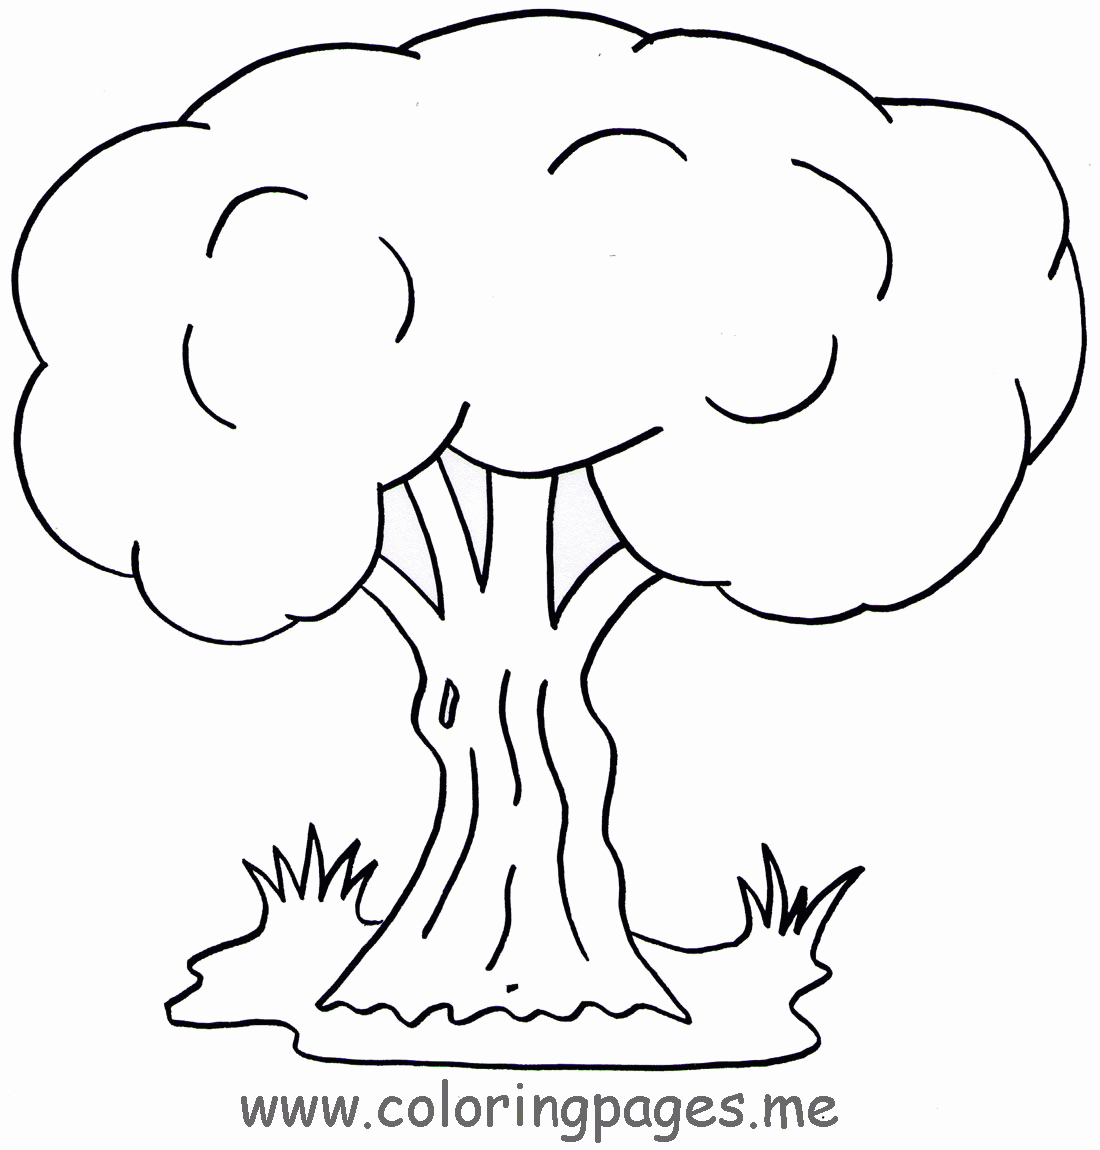 Tree Coloring - Coloring Pages for Kids and for Adults